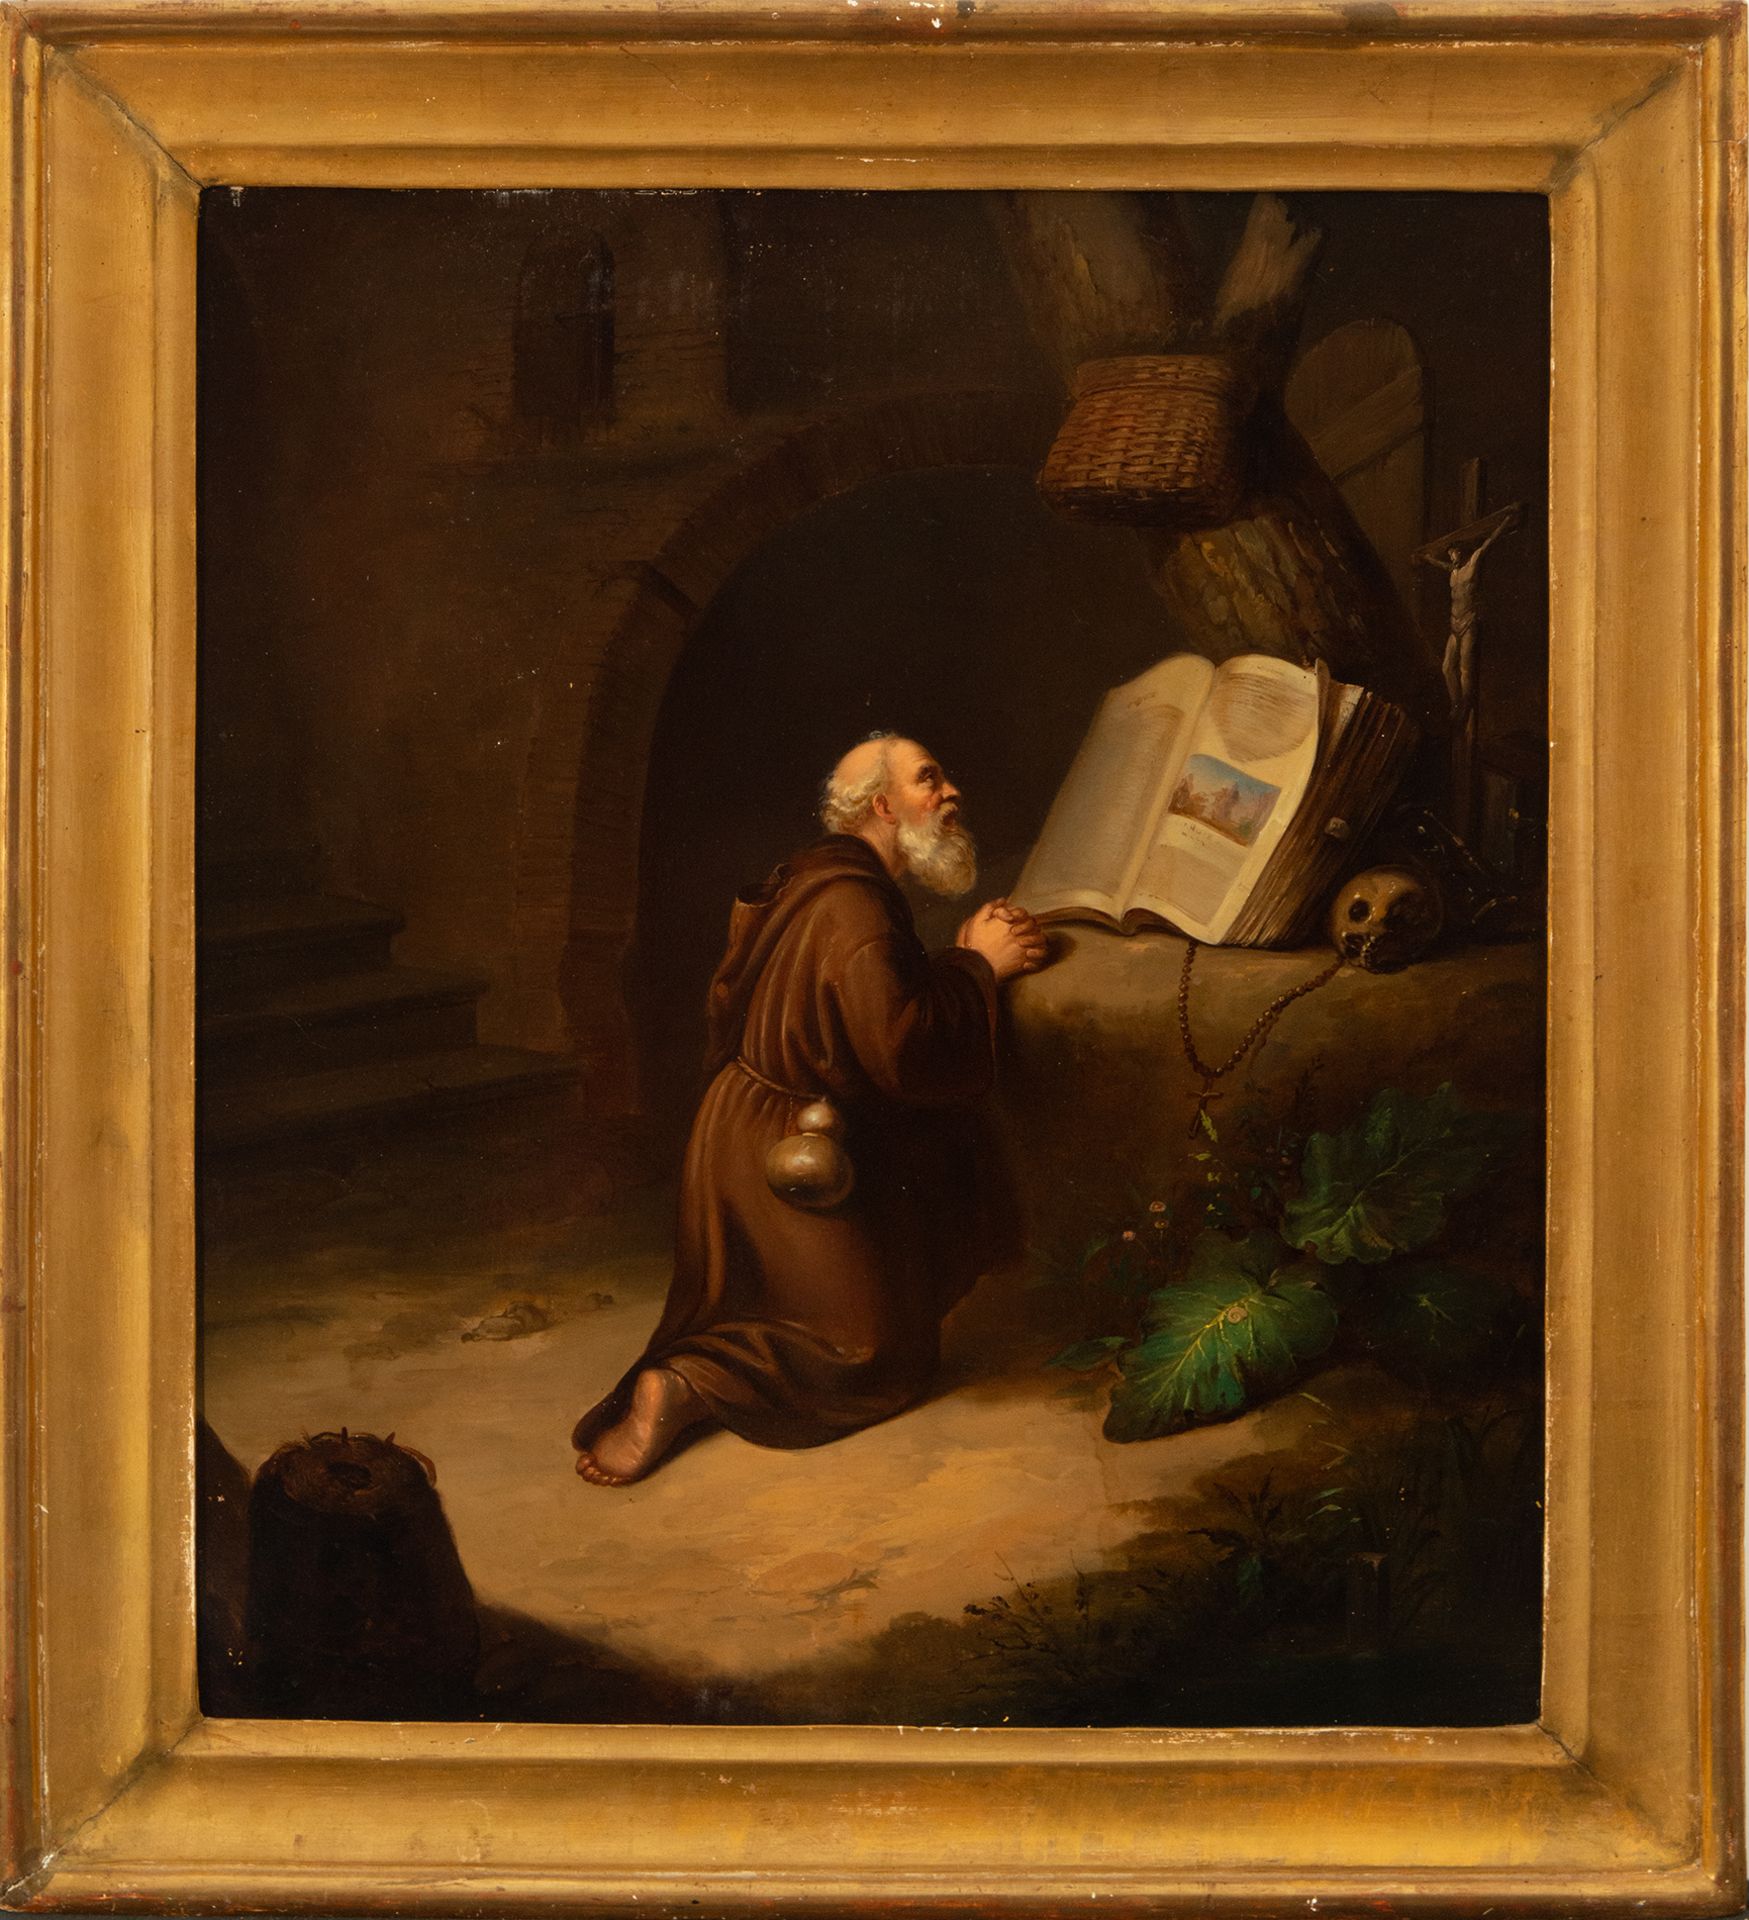 Saint Francis in Prayer, Italian school of the 18th and 19th centuries